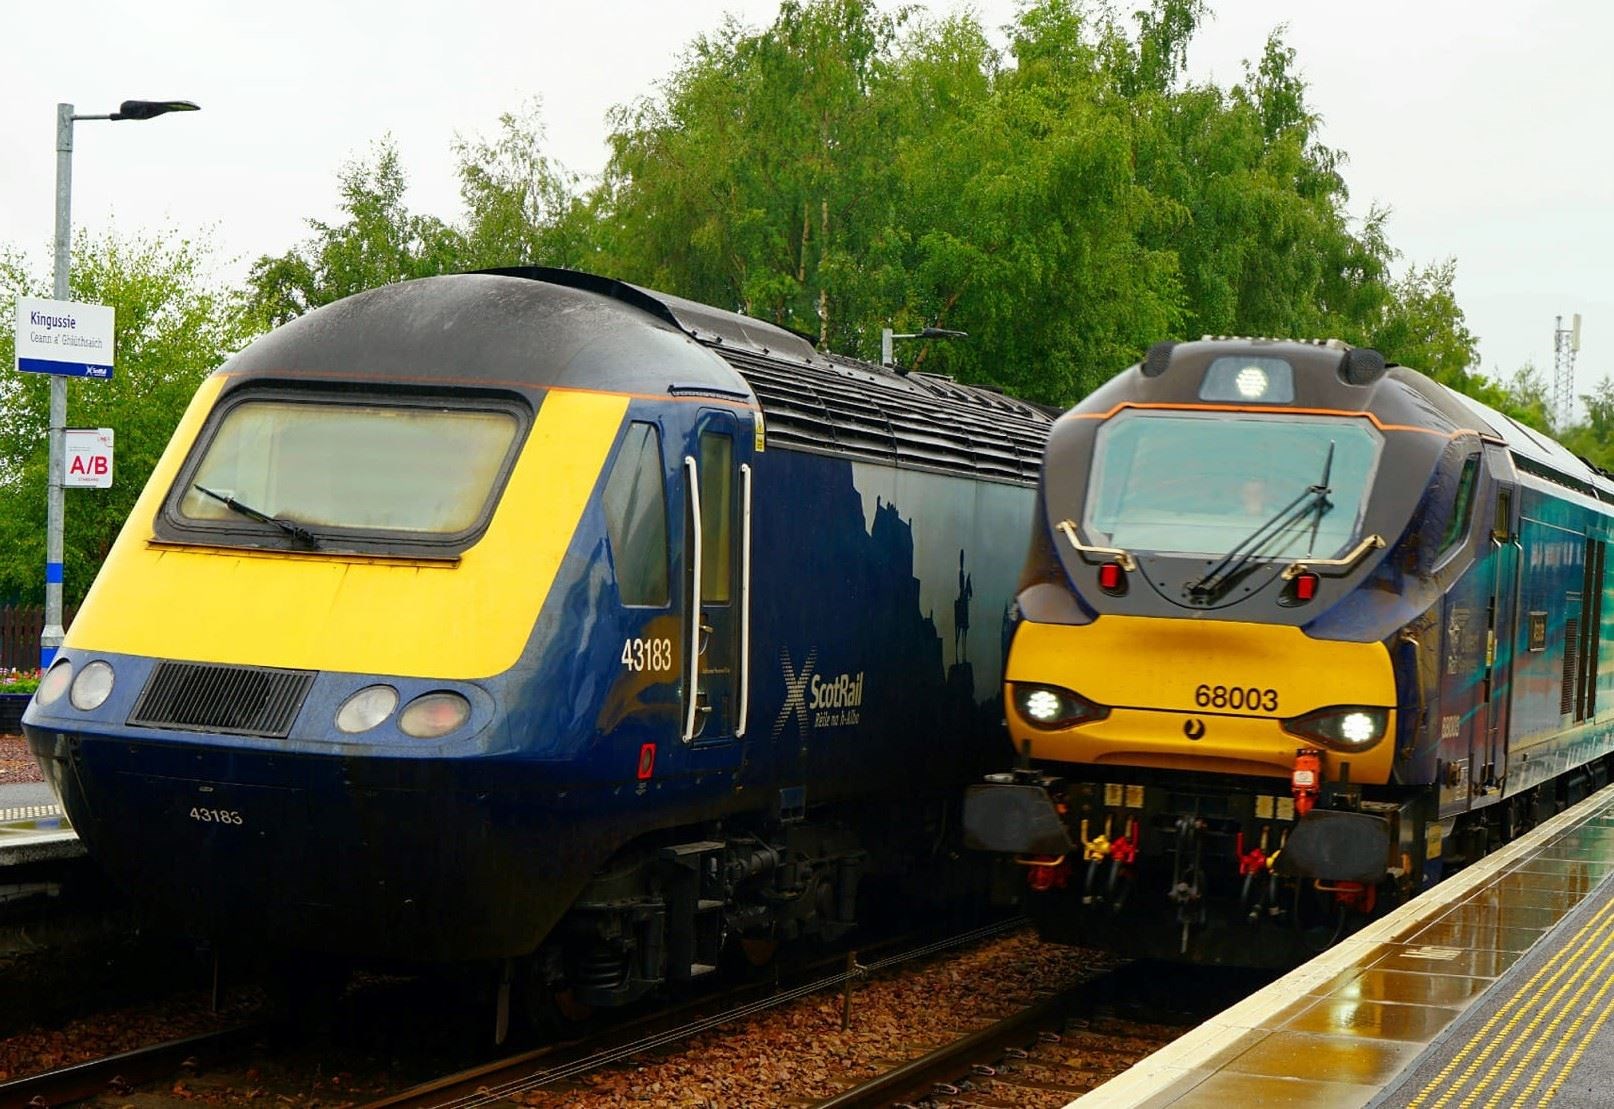 Some but not all train travel affected amid severe rain across the north